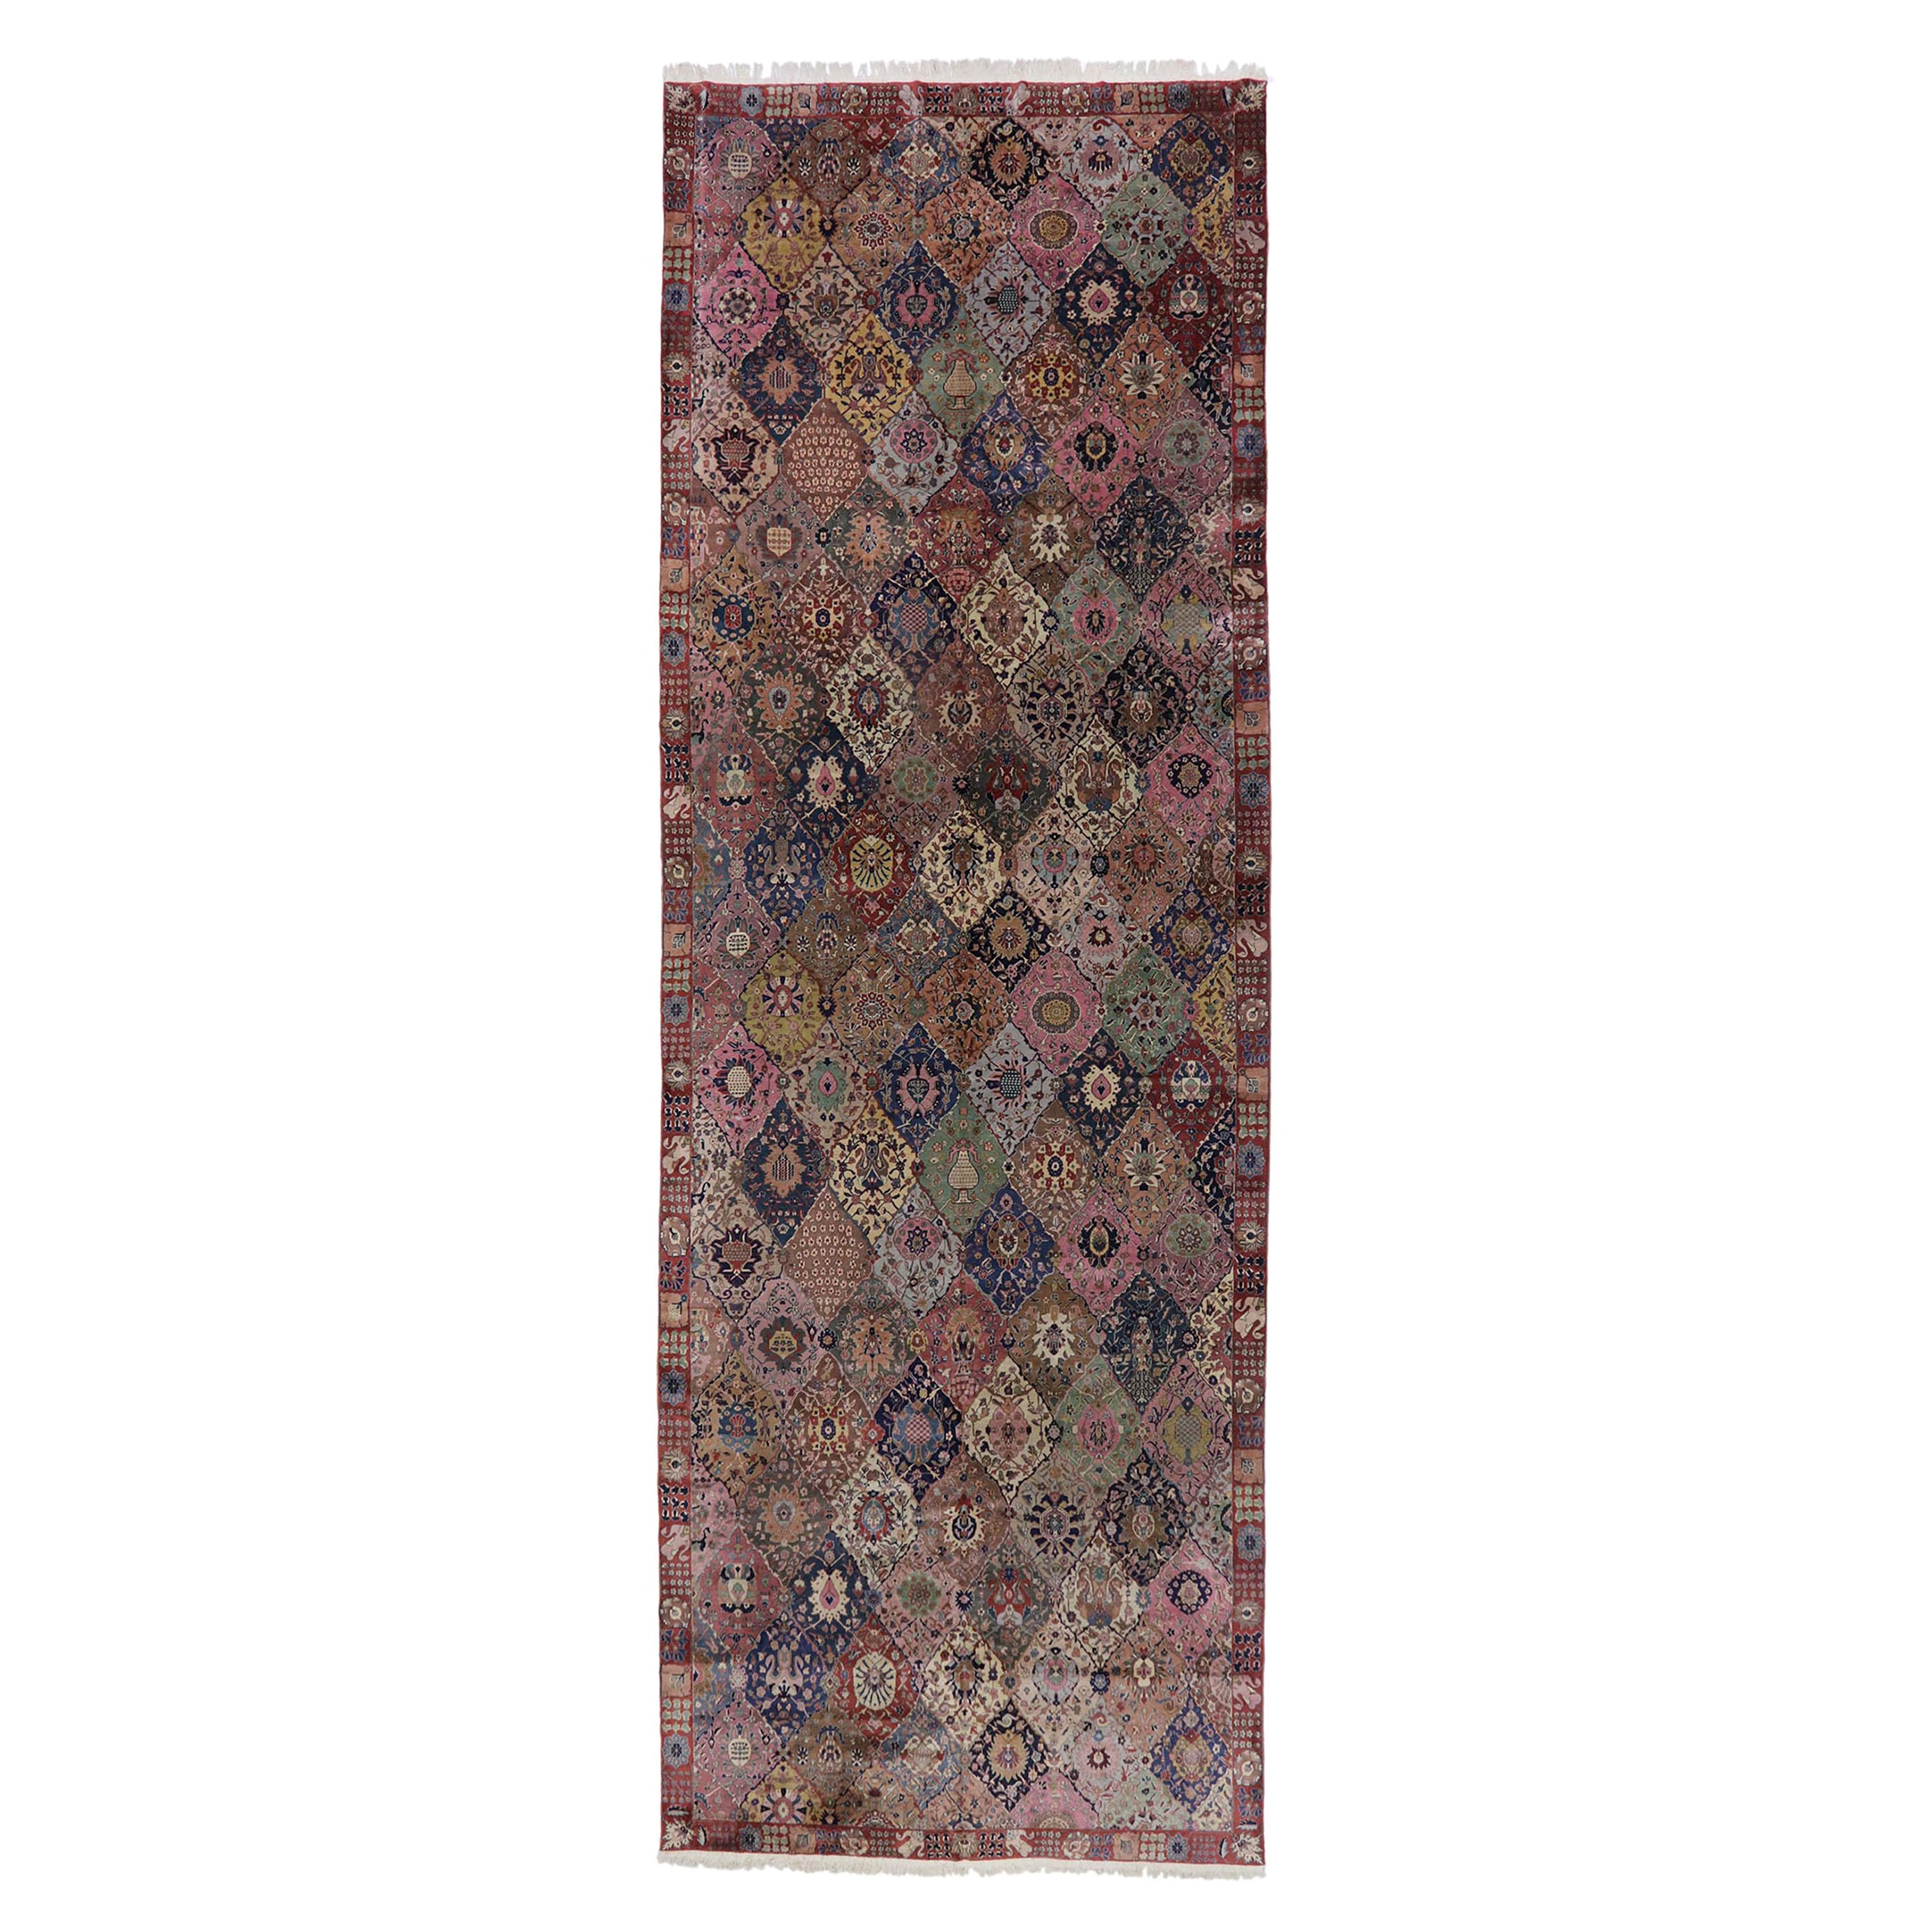 Victorian Indian Rugs